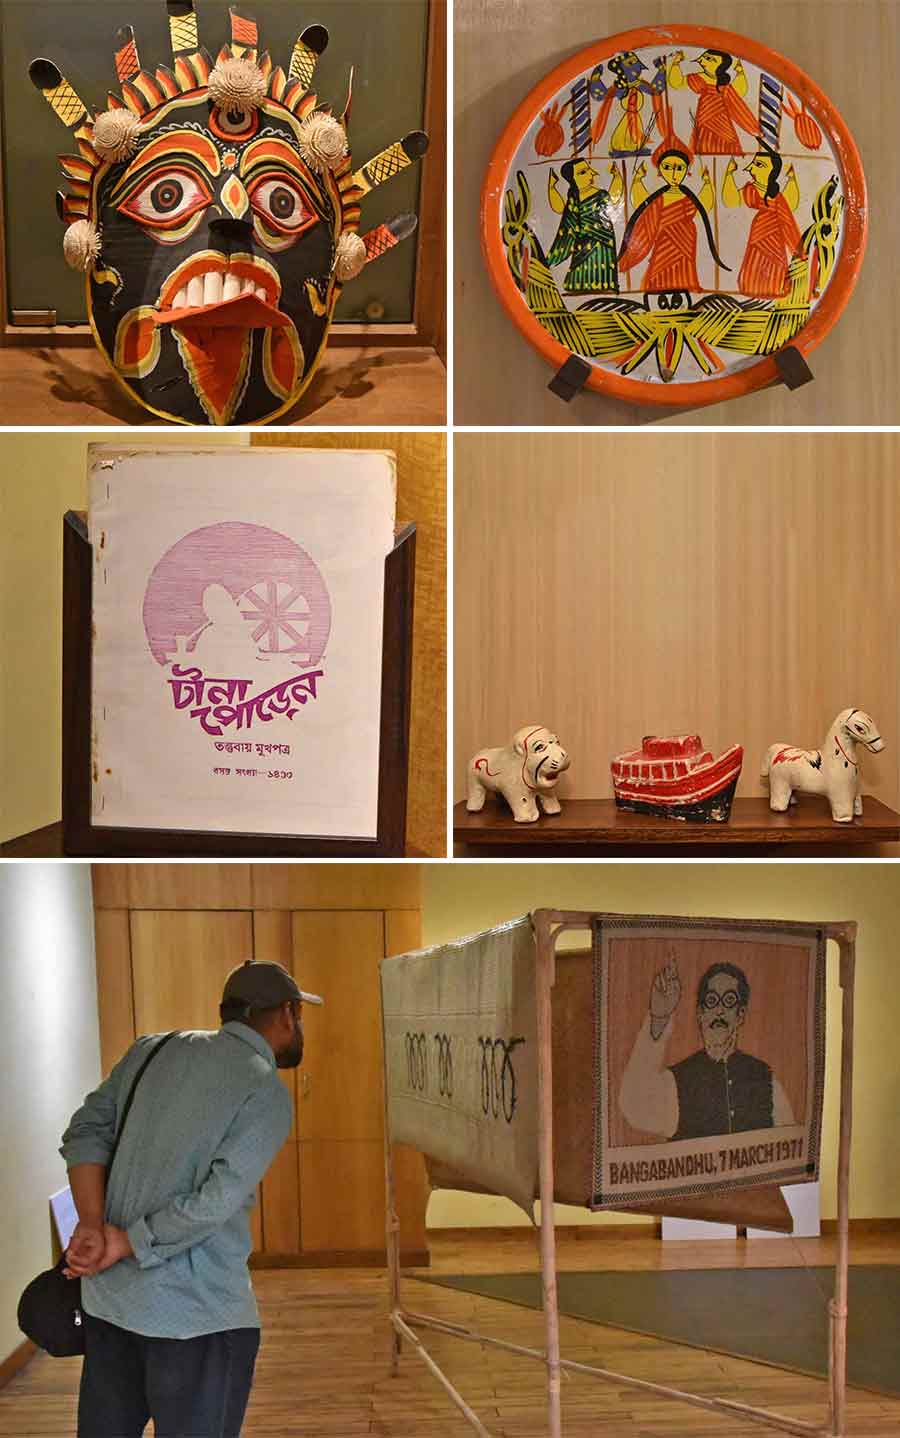 Artefacts on display at an interactive, multi-media exhibition titled ‘Parted Crafts’ which showcased the impact of the Partition of Bengal on the handicraft culture. The 10-day exhibition was inaugurated on Friday at the Bengal Gallery, ICCR, Kolkata. It will remain open to visitors between 3pm and 8pm. The project, supported through a Mead Fellowship award, granted to curator Archi Banerjee by the University of the Arts, London, is in collaboration with the Kolkata Partition Museum Trust. (Clockwise from top) A ‘shola’ mask; ‘Lakkhir shora’, a painting by Munshiganj’s artist Abalarani Pal; clay toys from Shekarnagar Mela Munshiganj; a man takes a close look at ‘Bangabandhu’ Sheikh Mujibur Rahman’s portrait on ‘pati’ created by second-generation migrant ‘pati’ weavers from Cooch Behar; ‘Tana-Poren’, a local magazine, started by Balaram Basak and Haripada Basak in the 1980s to document the history of Phulia’s weaver community.  The exhibition aims to take a fresh look at marginalised artisanal communities